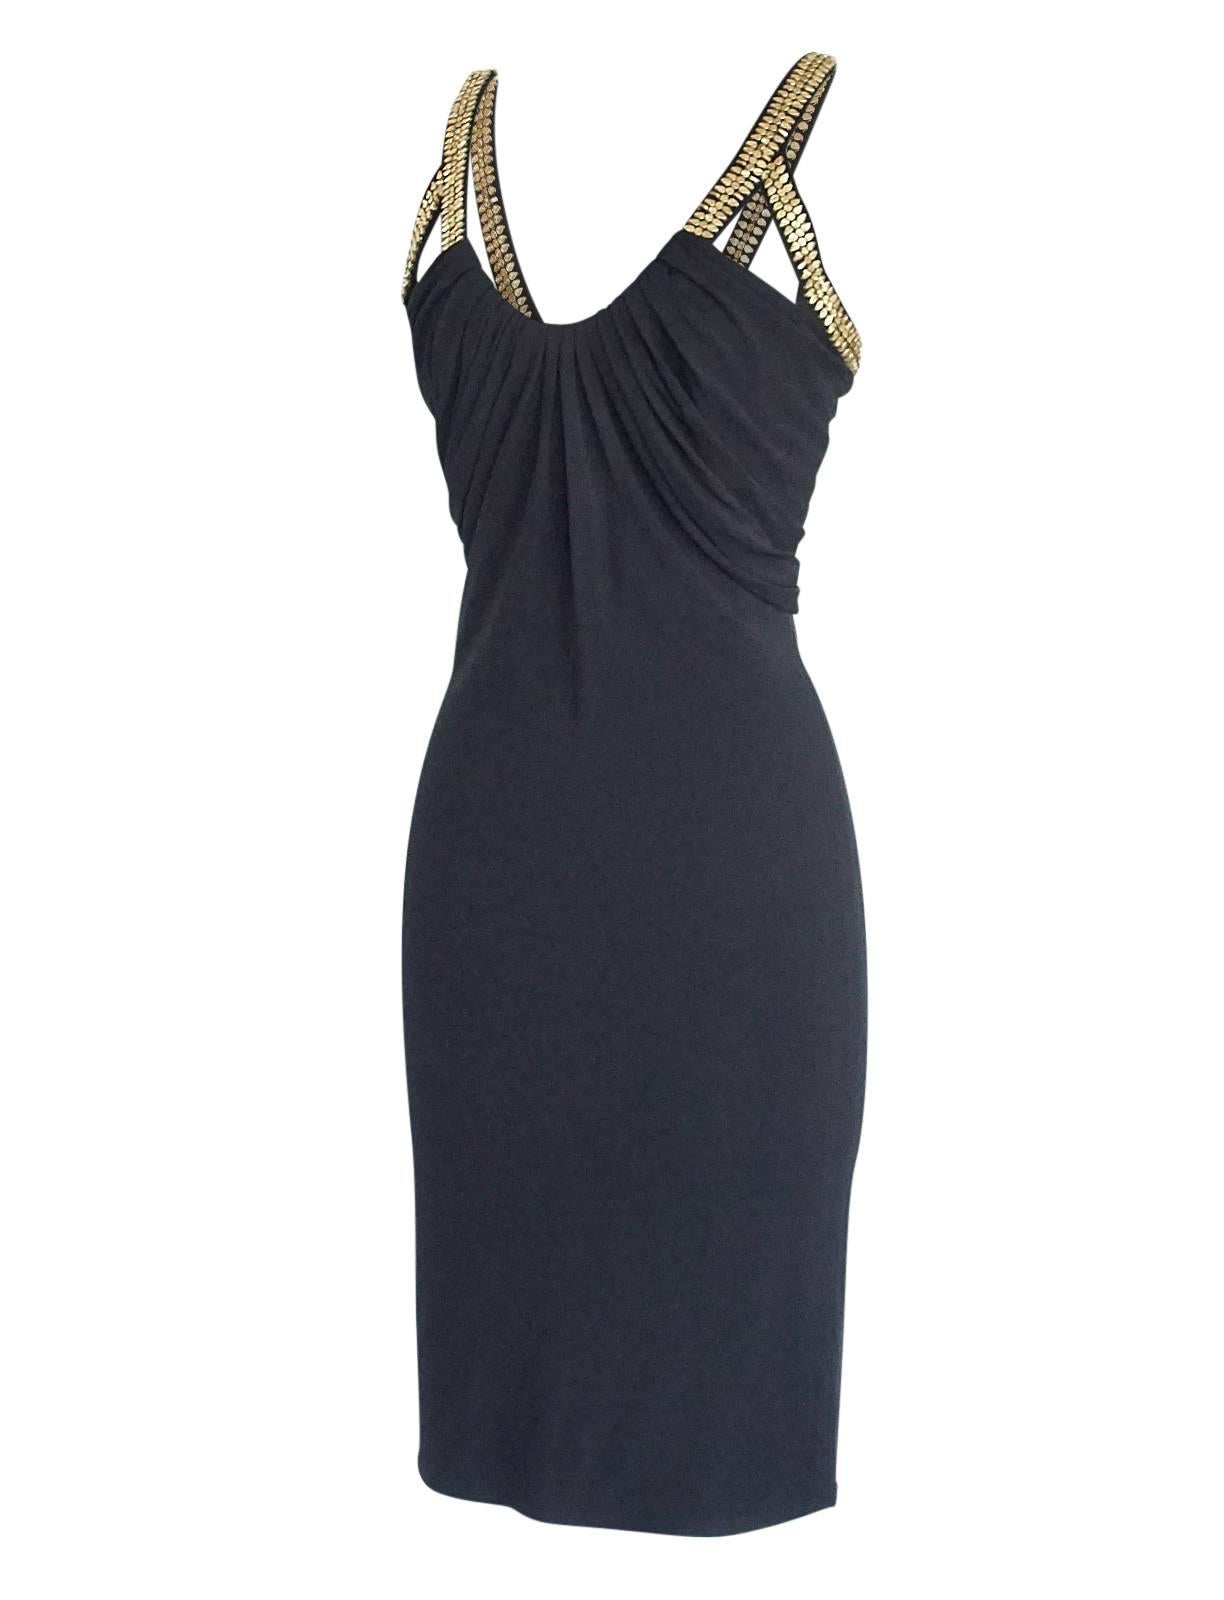 Versace Dress Gold Hardware Black pleated and Rouched 40 / 4 at 1stDibs